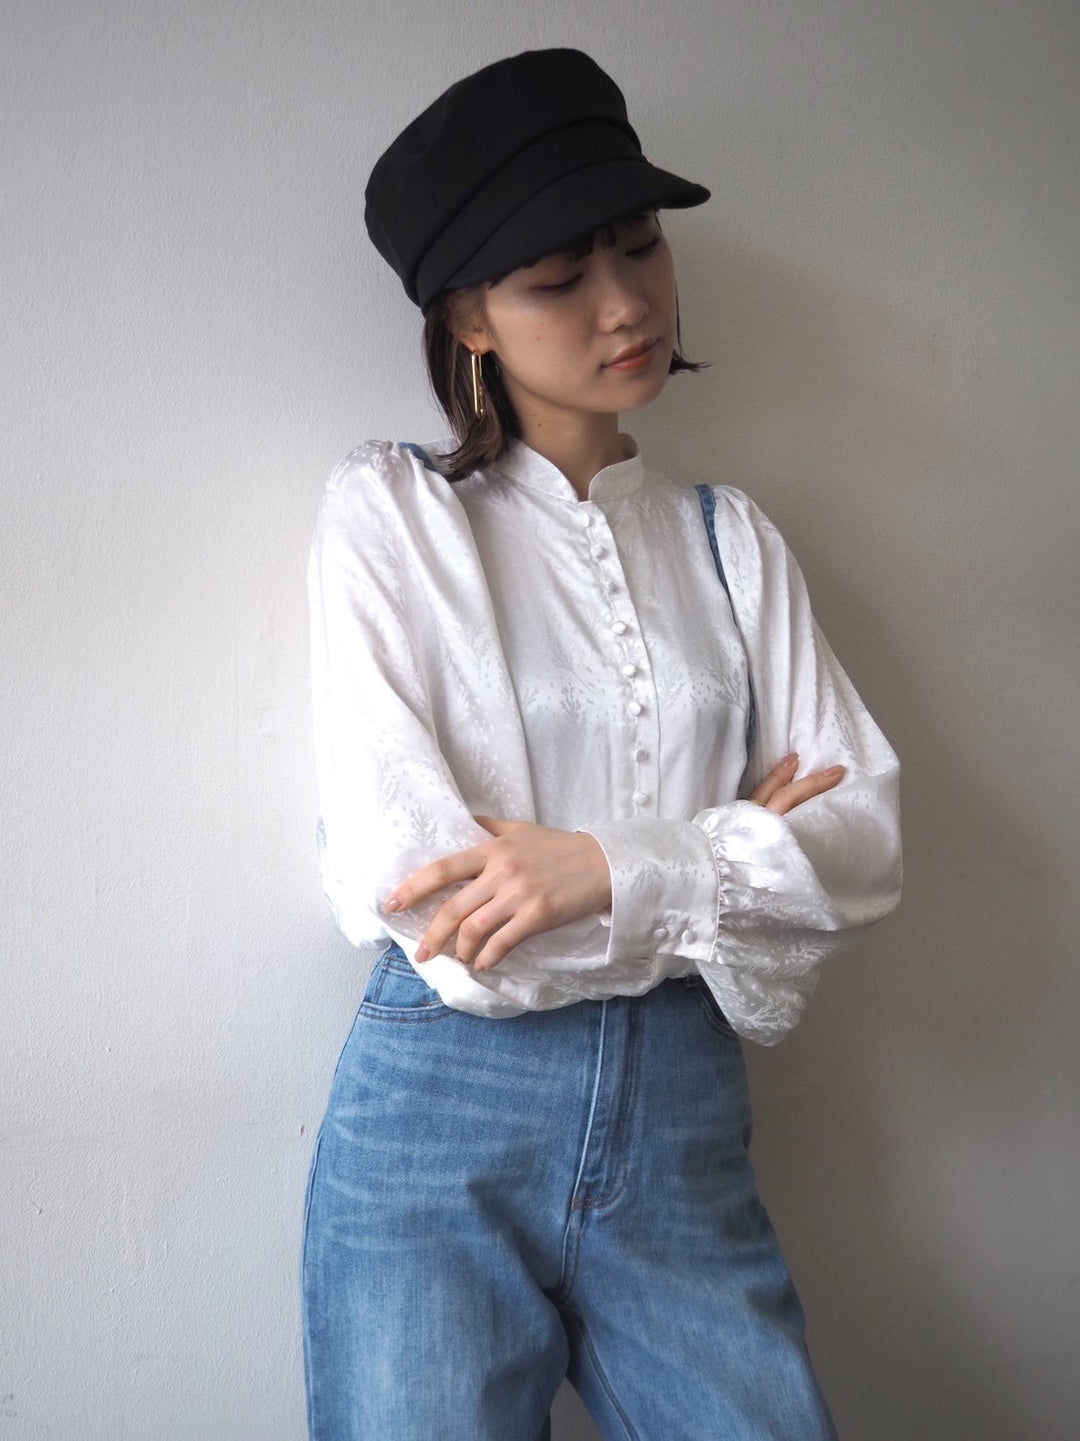 Denim lace-up pants with suspenders/bleached